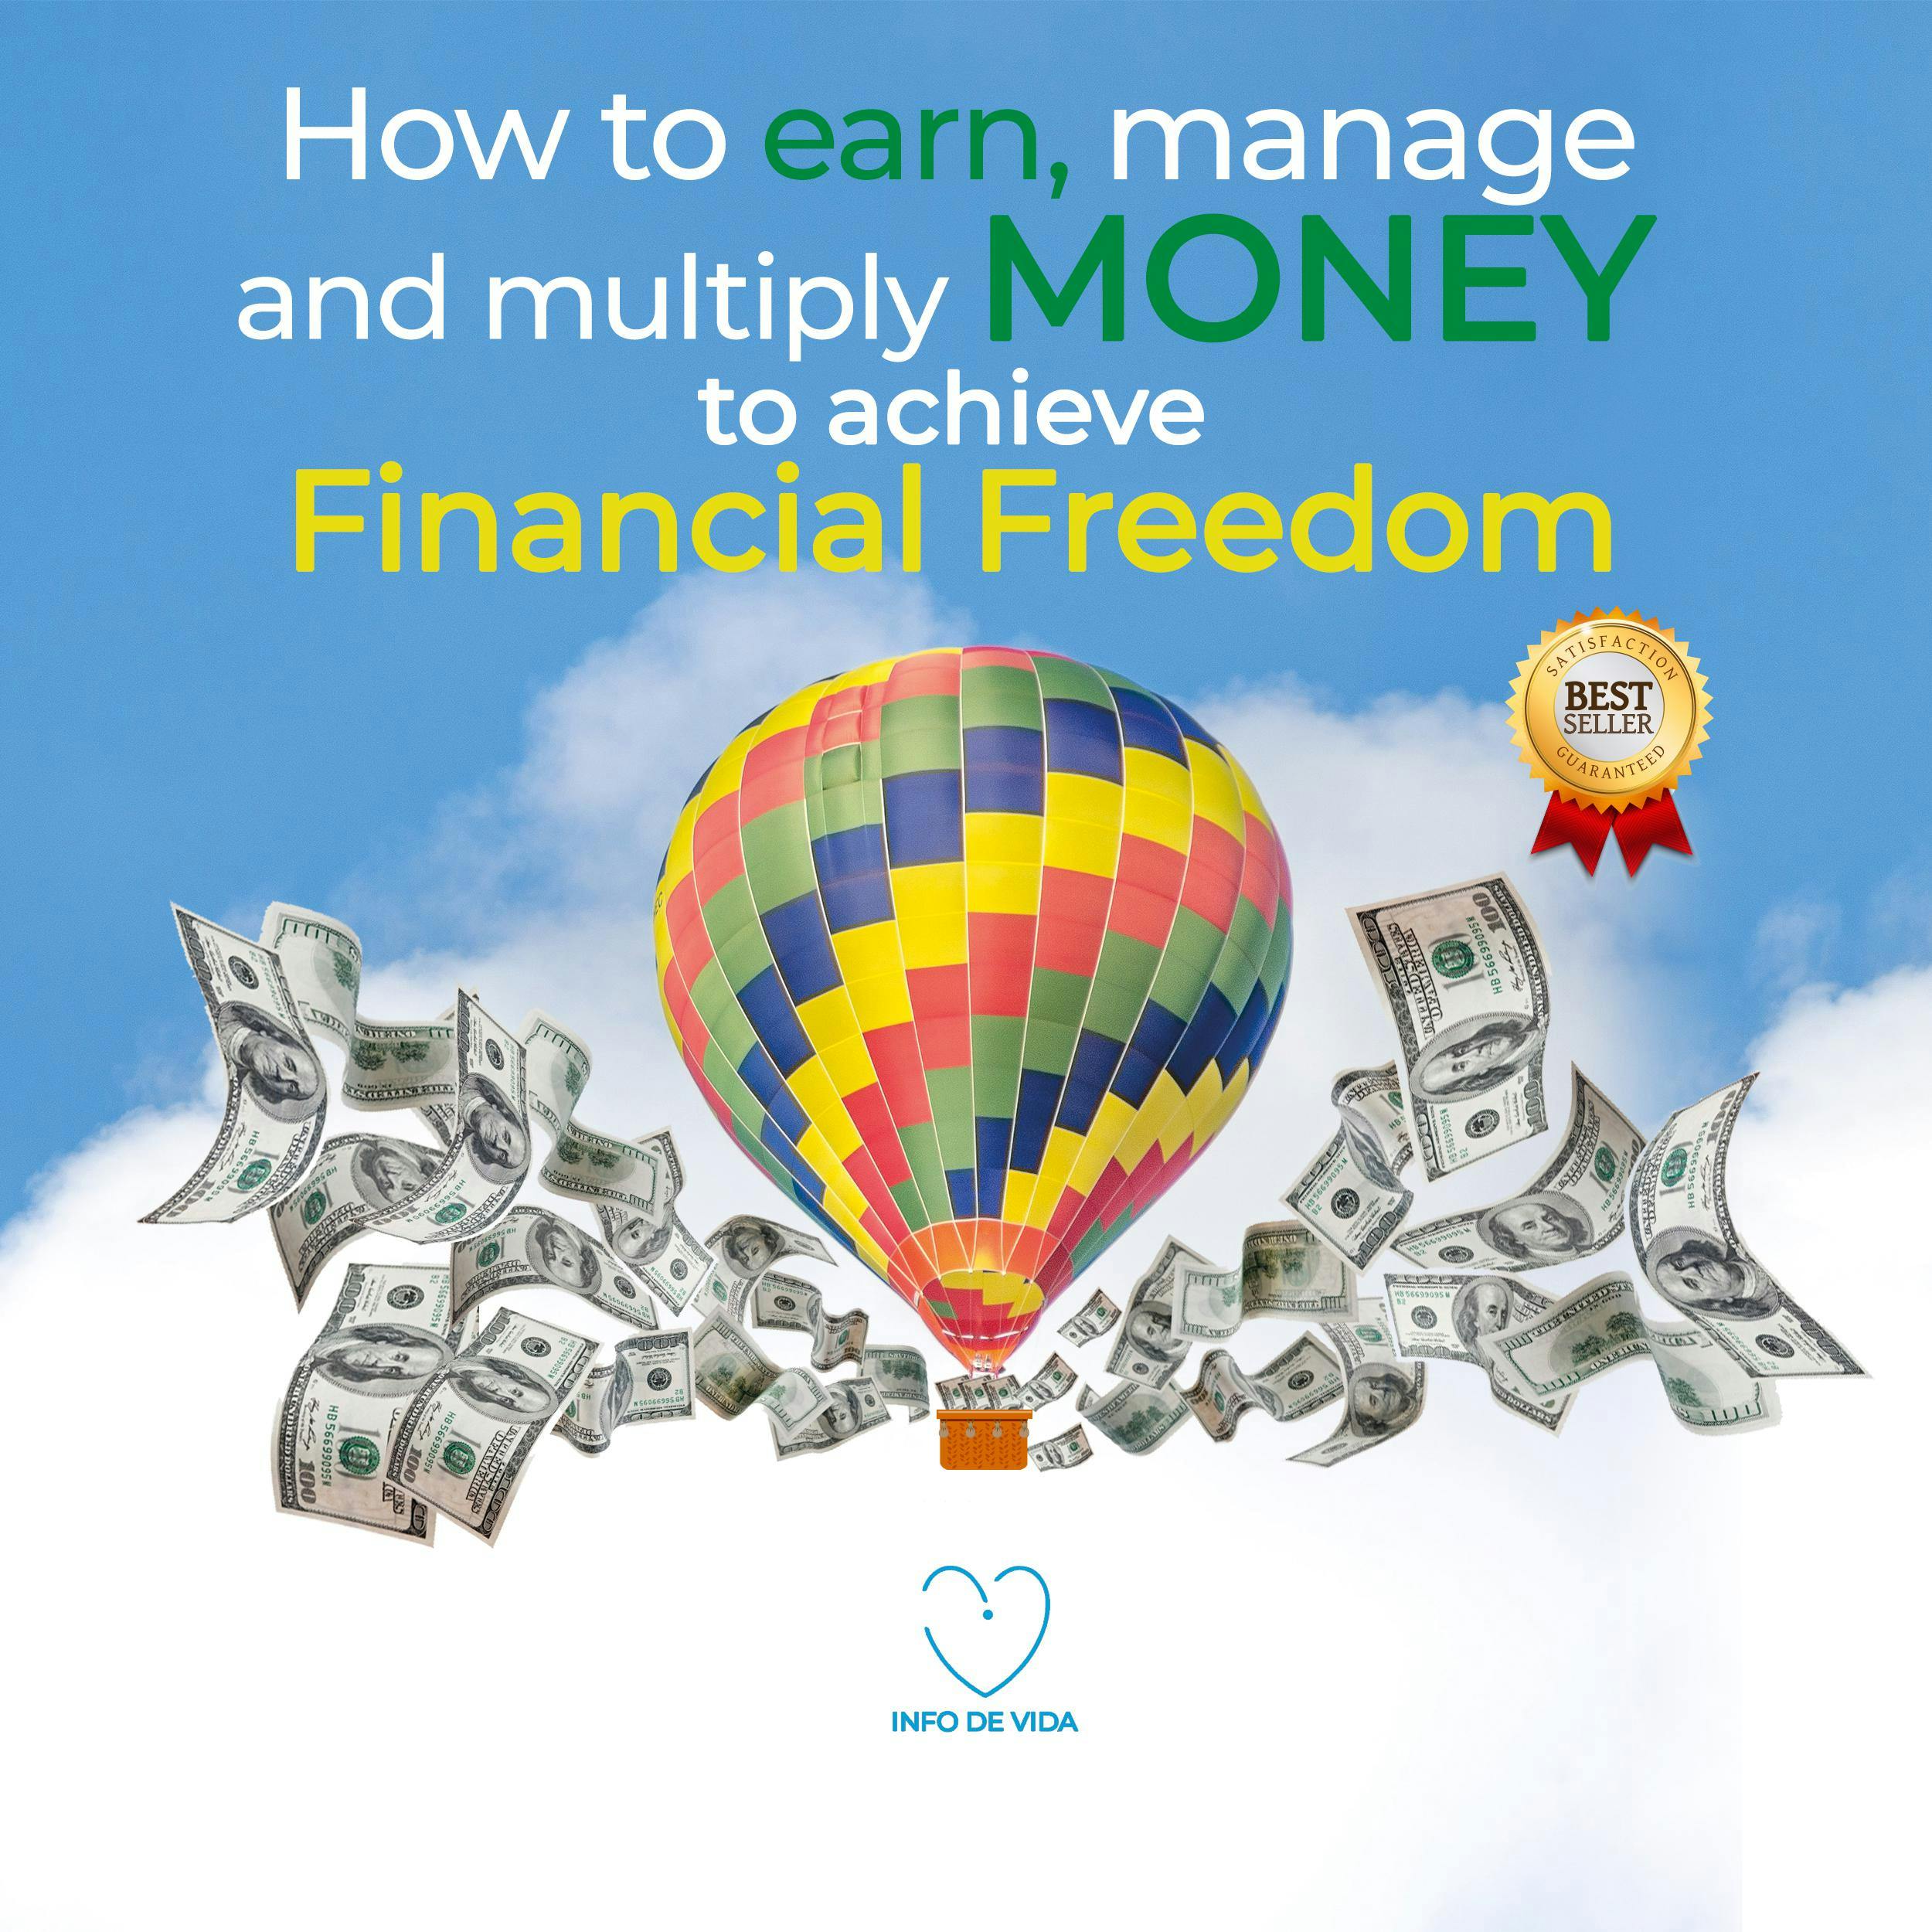 How to earn, manage and multiply money to achieve financial freedom - undefined